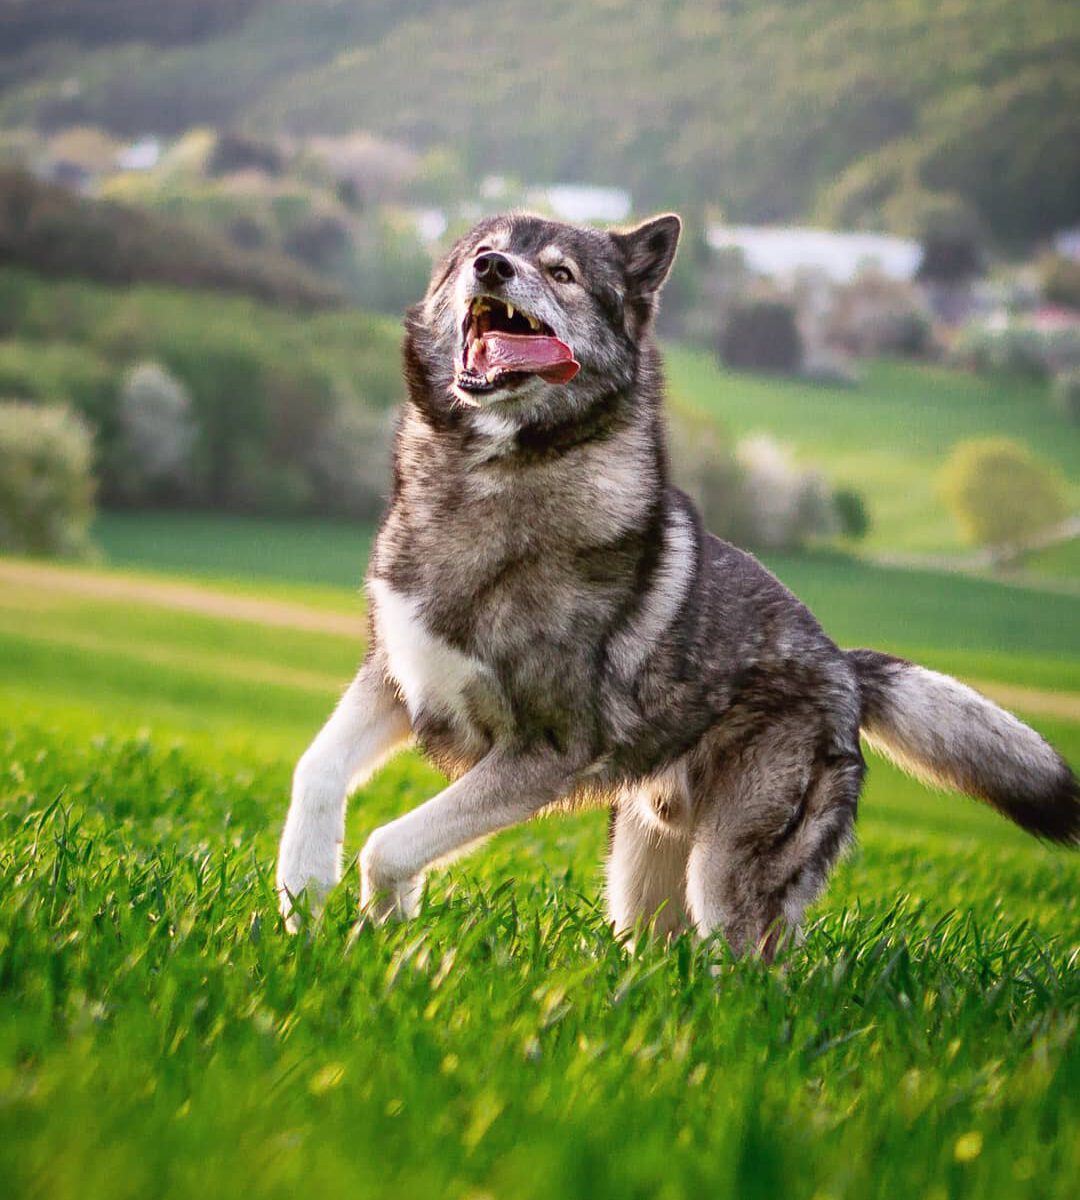 One of the most beautiful moments is Ninja dashing over the meadows... The joy s...